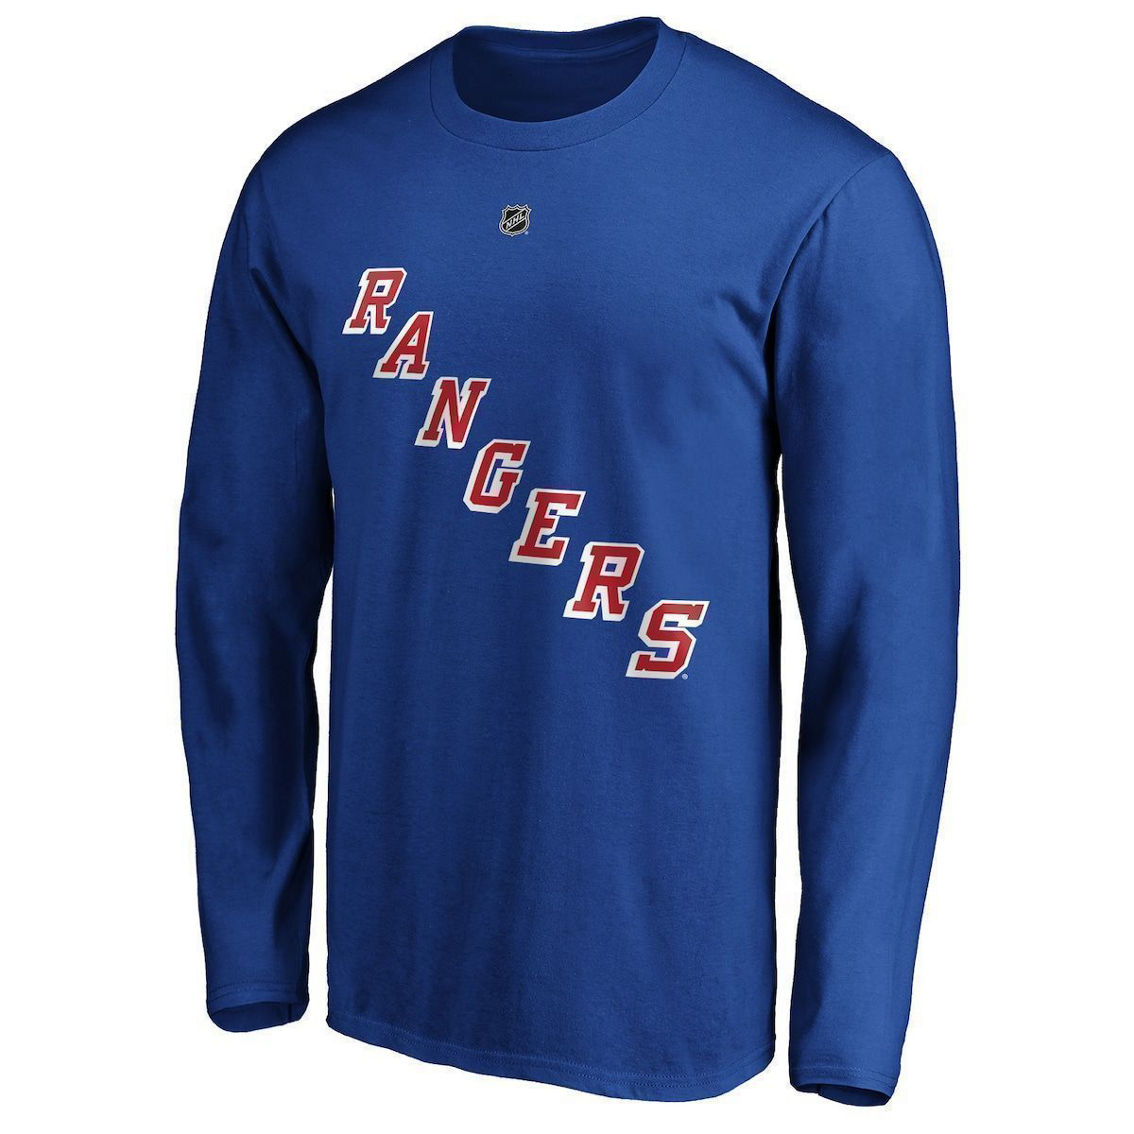 Fanatics Branded Men's Alexis Lafrenière Blue New York Rangers Authentic Stack Name & Number Long Sleeve T-Shirt - Image 3 of 4